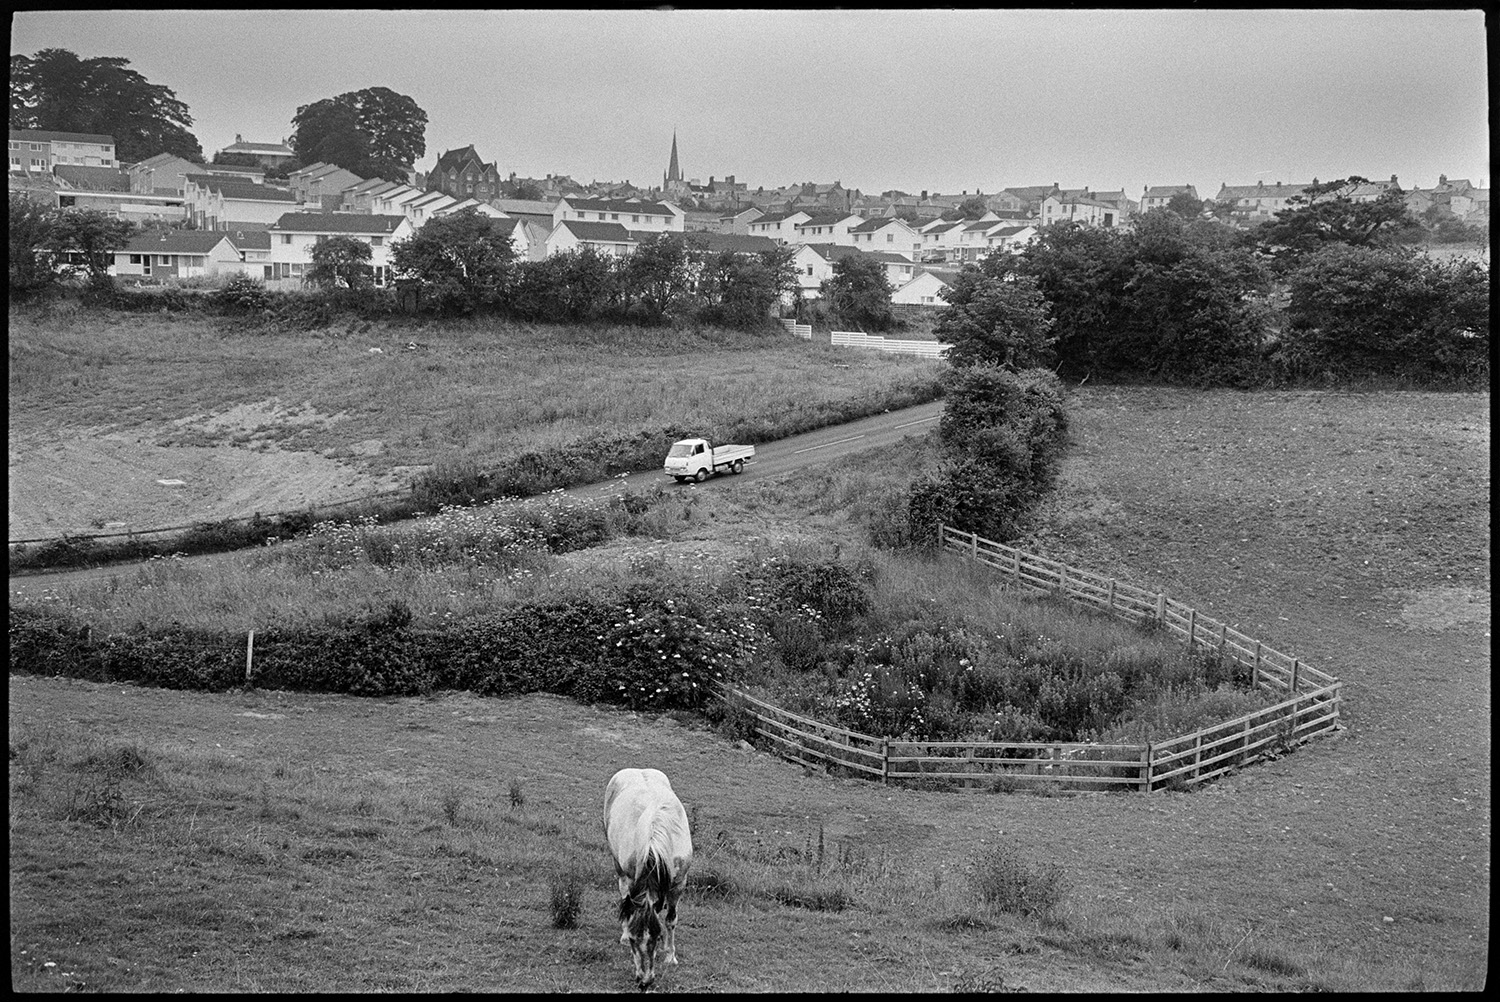 Horse in field in front of town before development. 
[A horse grazing in a field before the area was developed in Torrington. The town of Torrington can be seen in the background.]